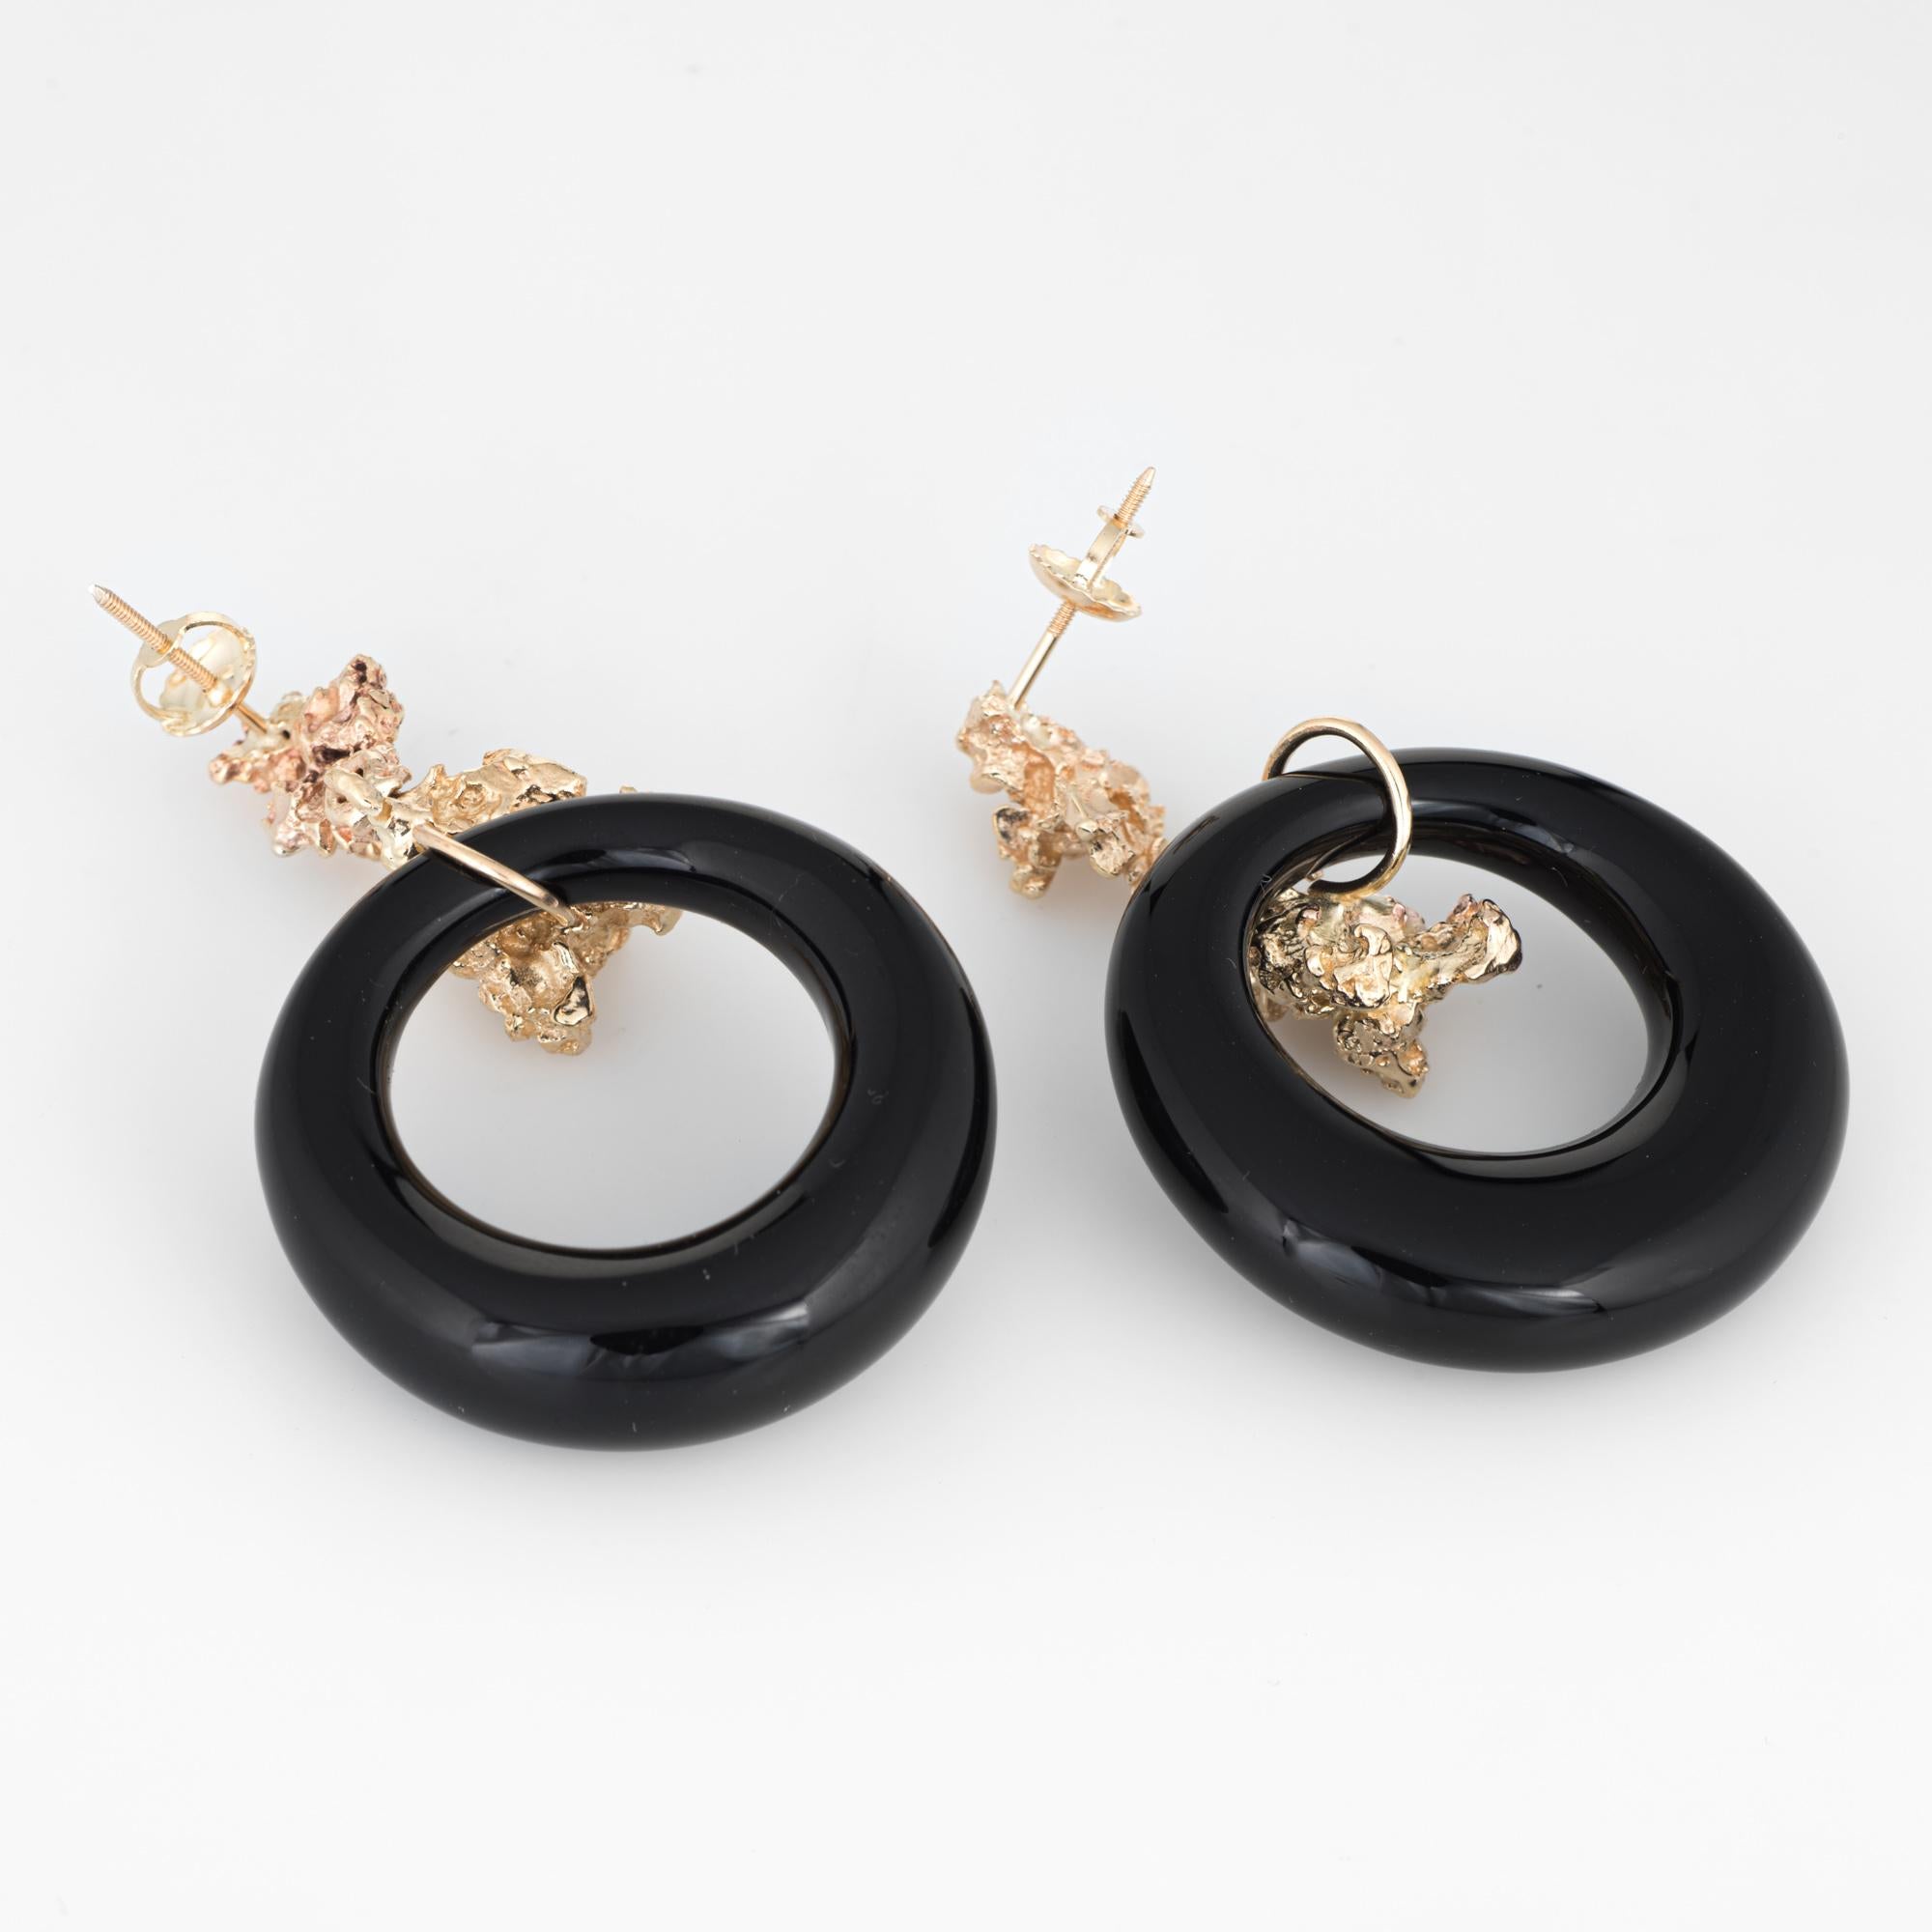 Elegant pair of vintage onyx hoop earrings (circa 1970s) crafted in 14k yellow gold. 

Onyx hoops measure from 4mm to 7.5mm. The onyx is in excellent condition and free of cracks or chips. 

The onyx is supported by freeform gold nuggets (14k gold).